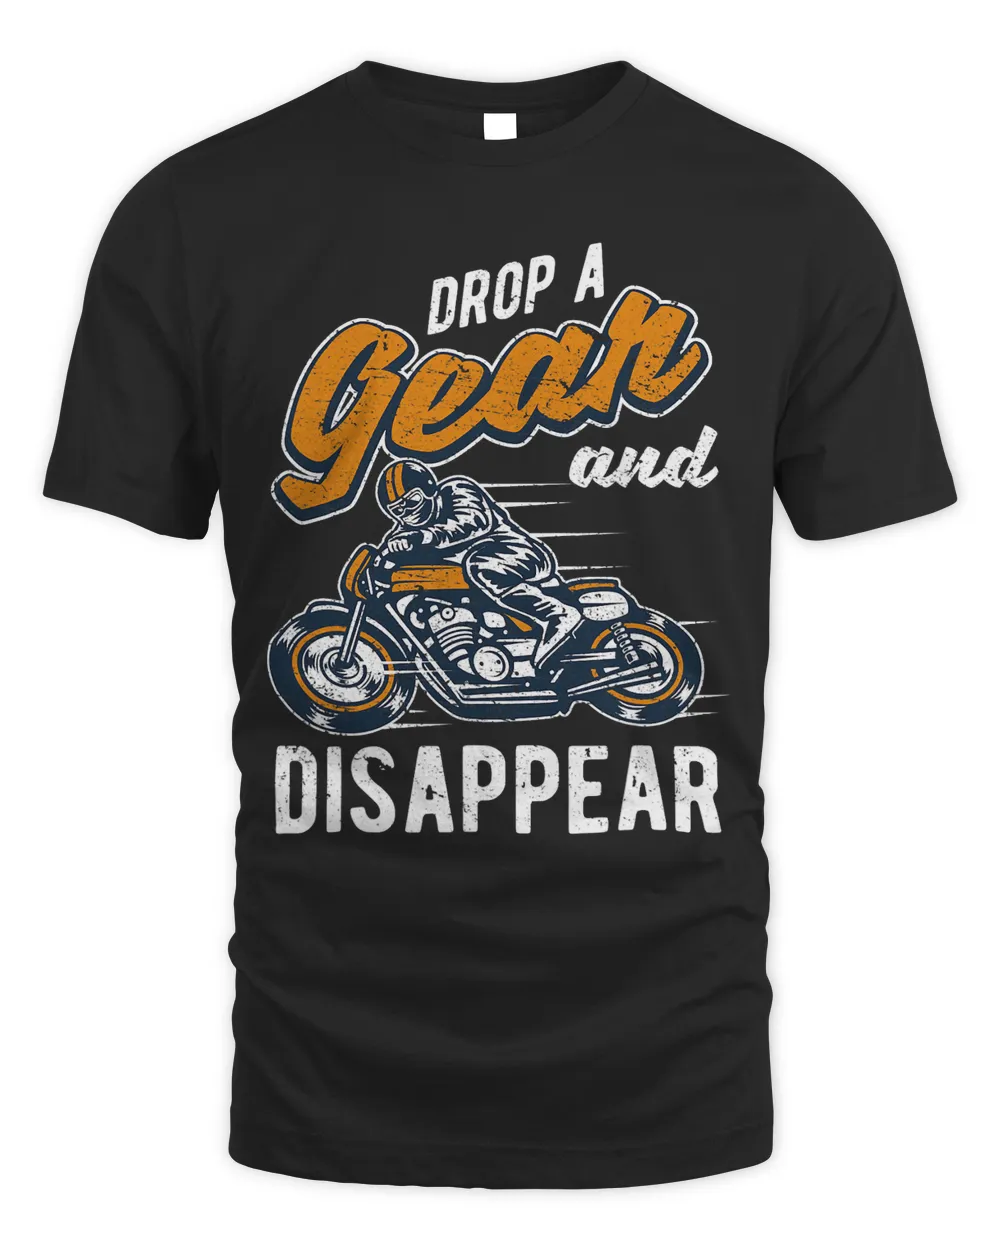 Drop a Gear and Disappear Funny Biker Gift for Motorcyclists